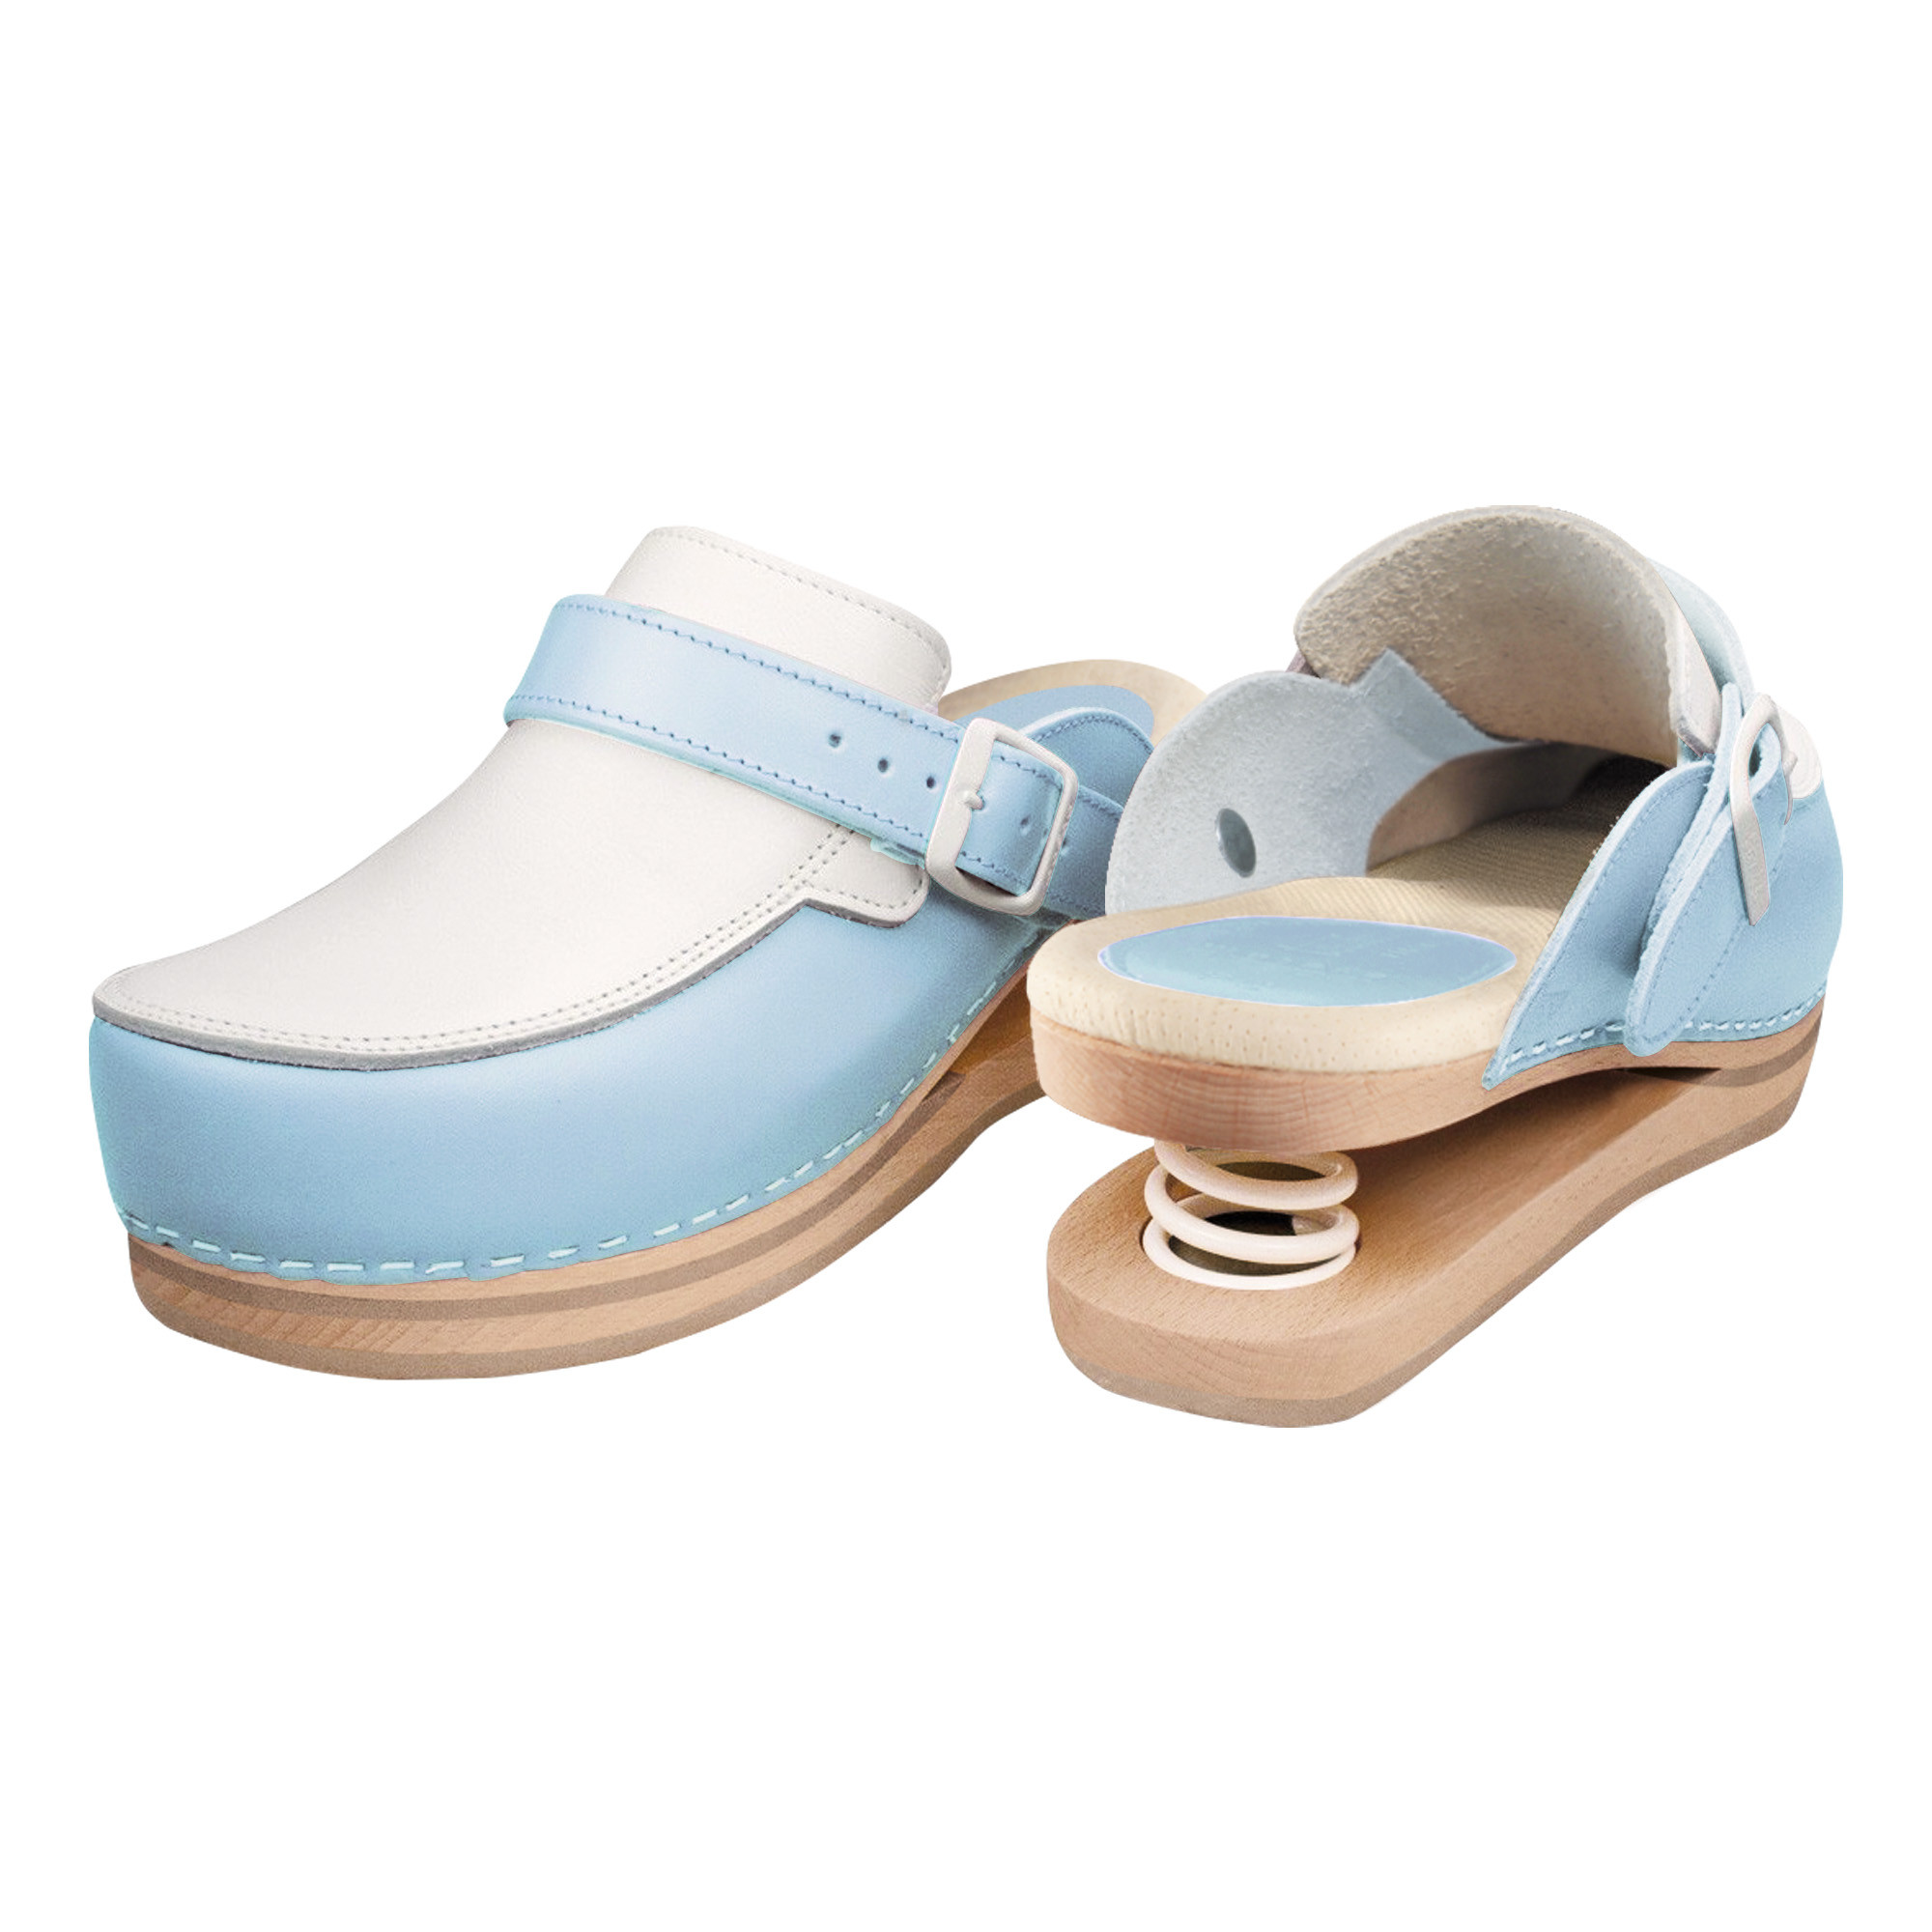 Relax clogs closed with light blue spring Size 39